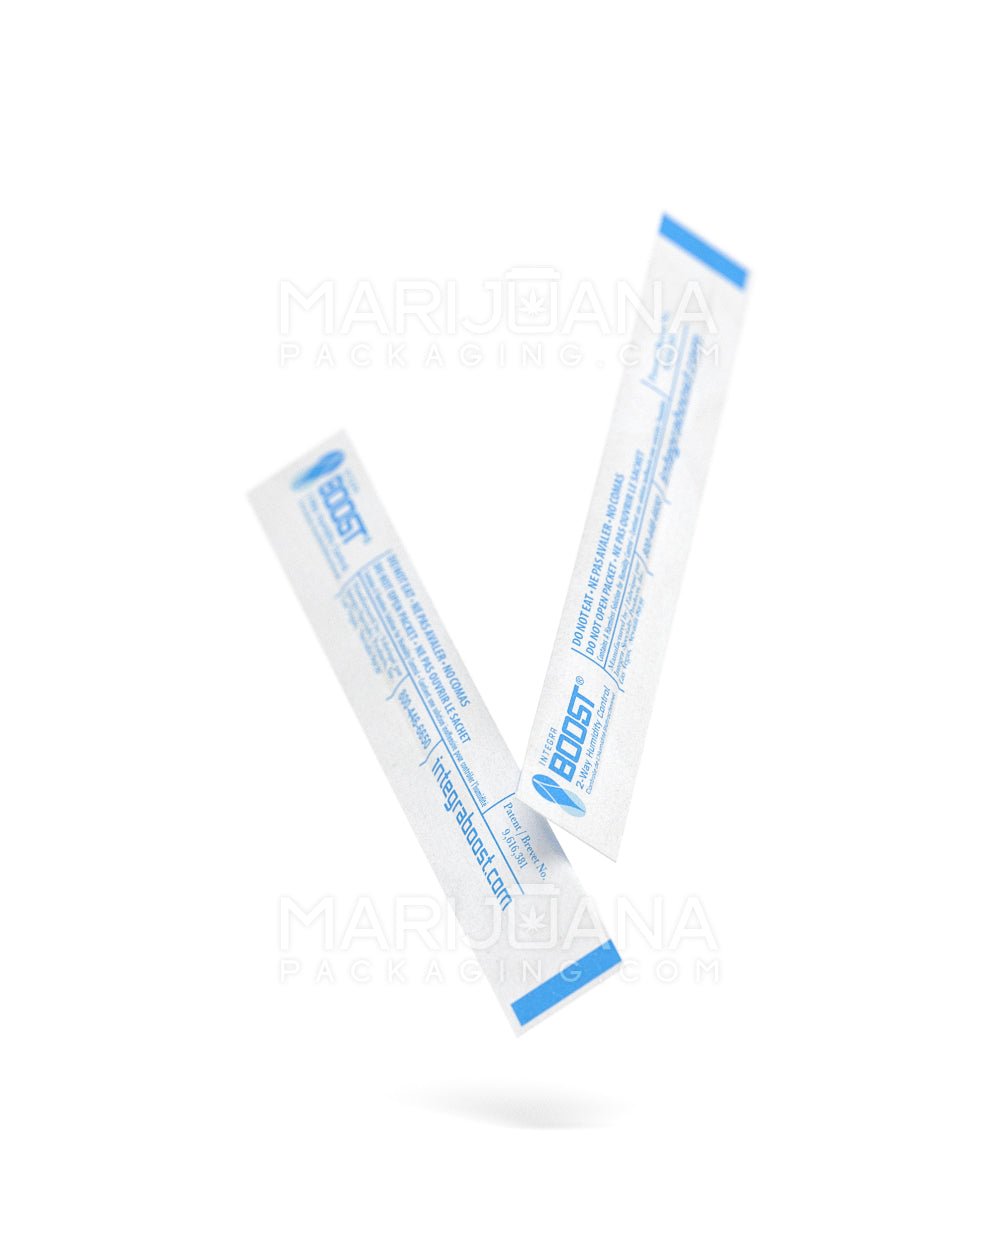 INTEGRA | Boost Pre-Roll Humidity Packs | 80mm - 55% - 100 Count - 4